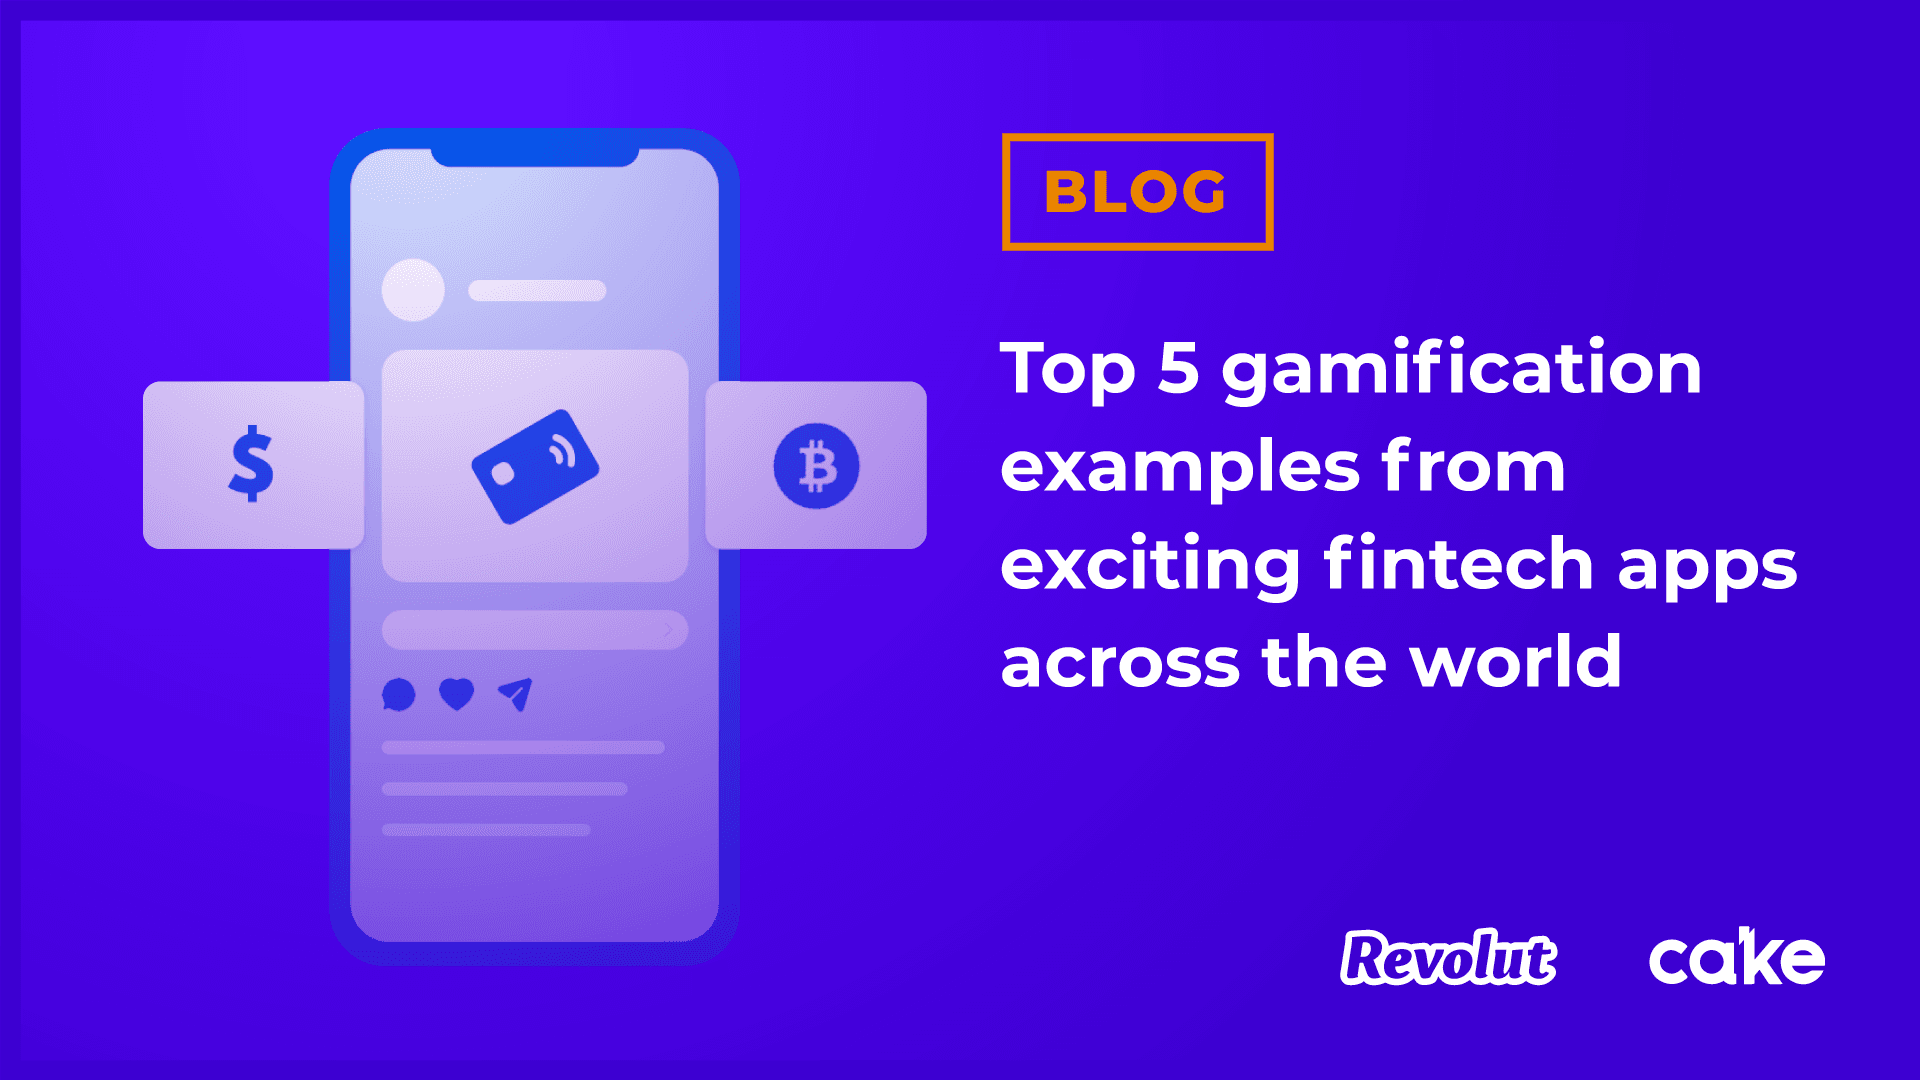 Top 5 gamification examples from exciting fintech apps across the world cover